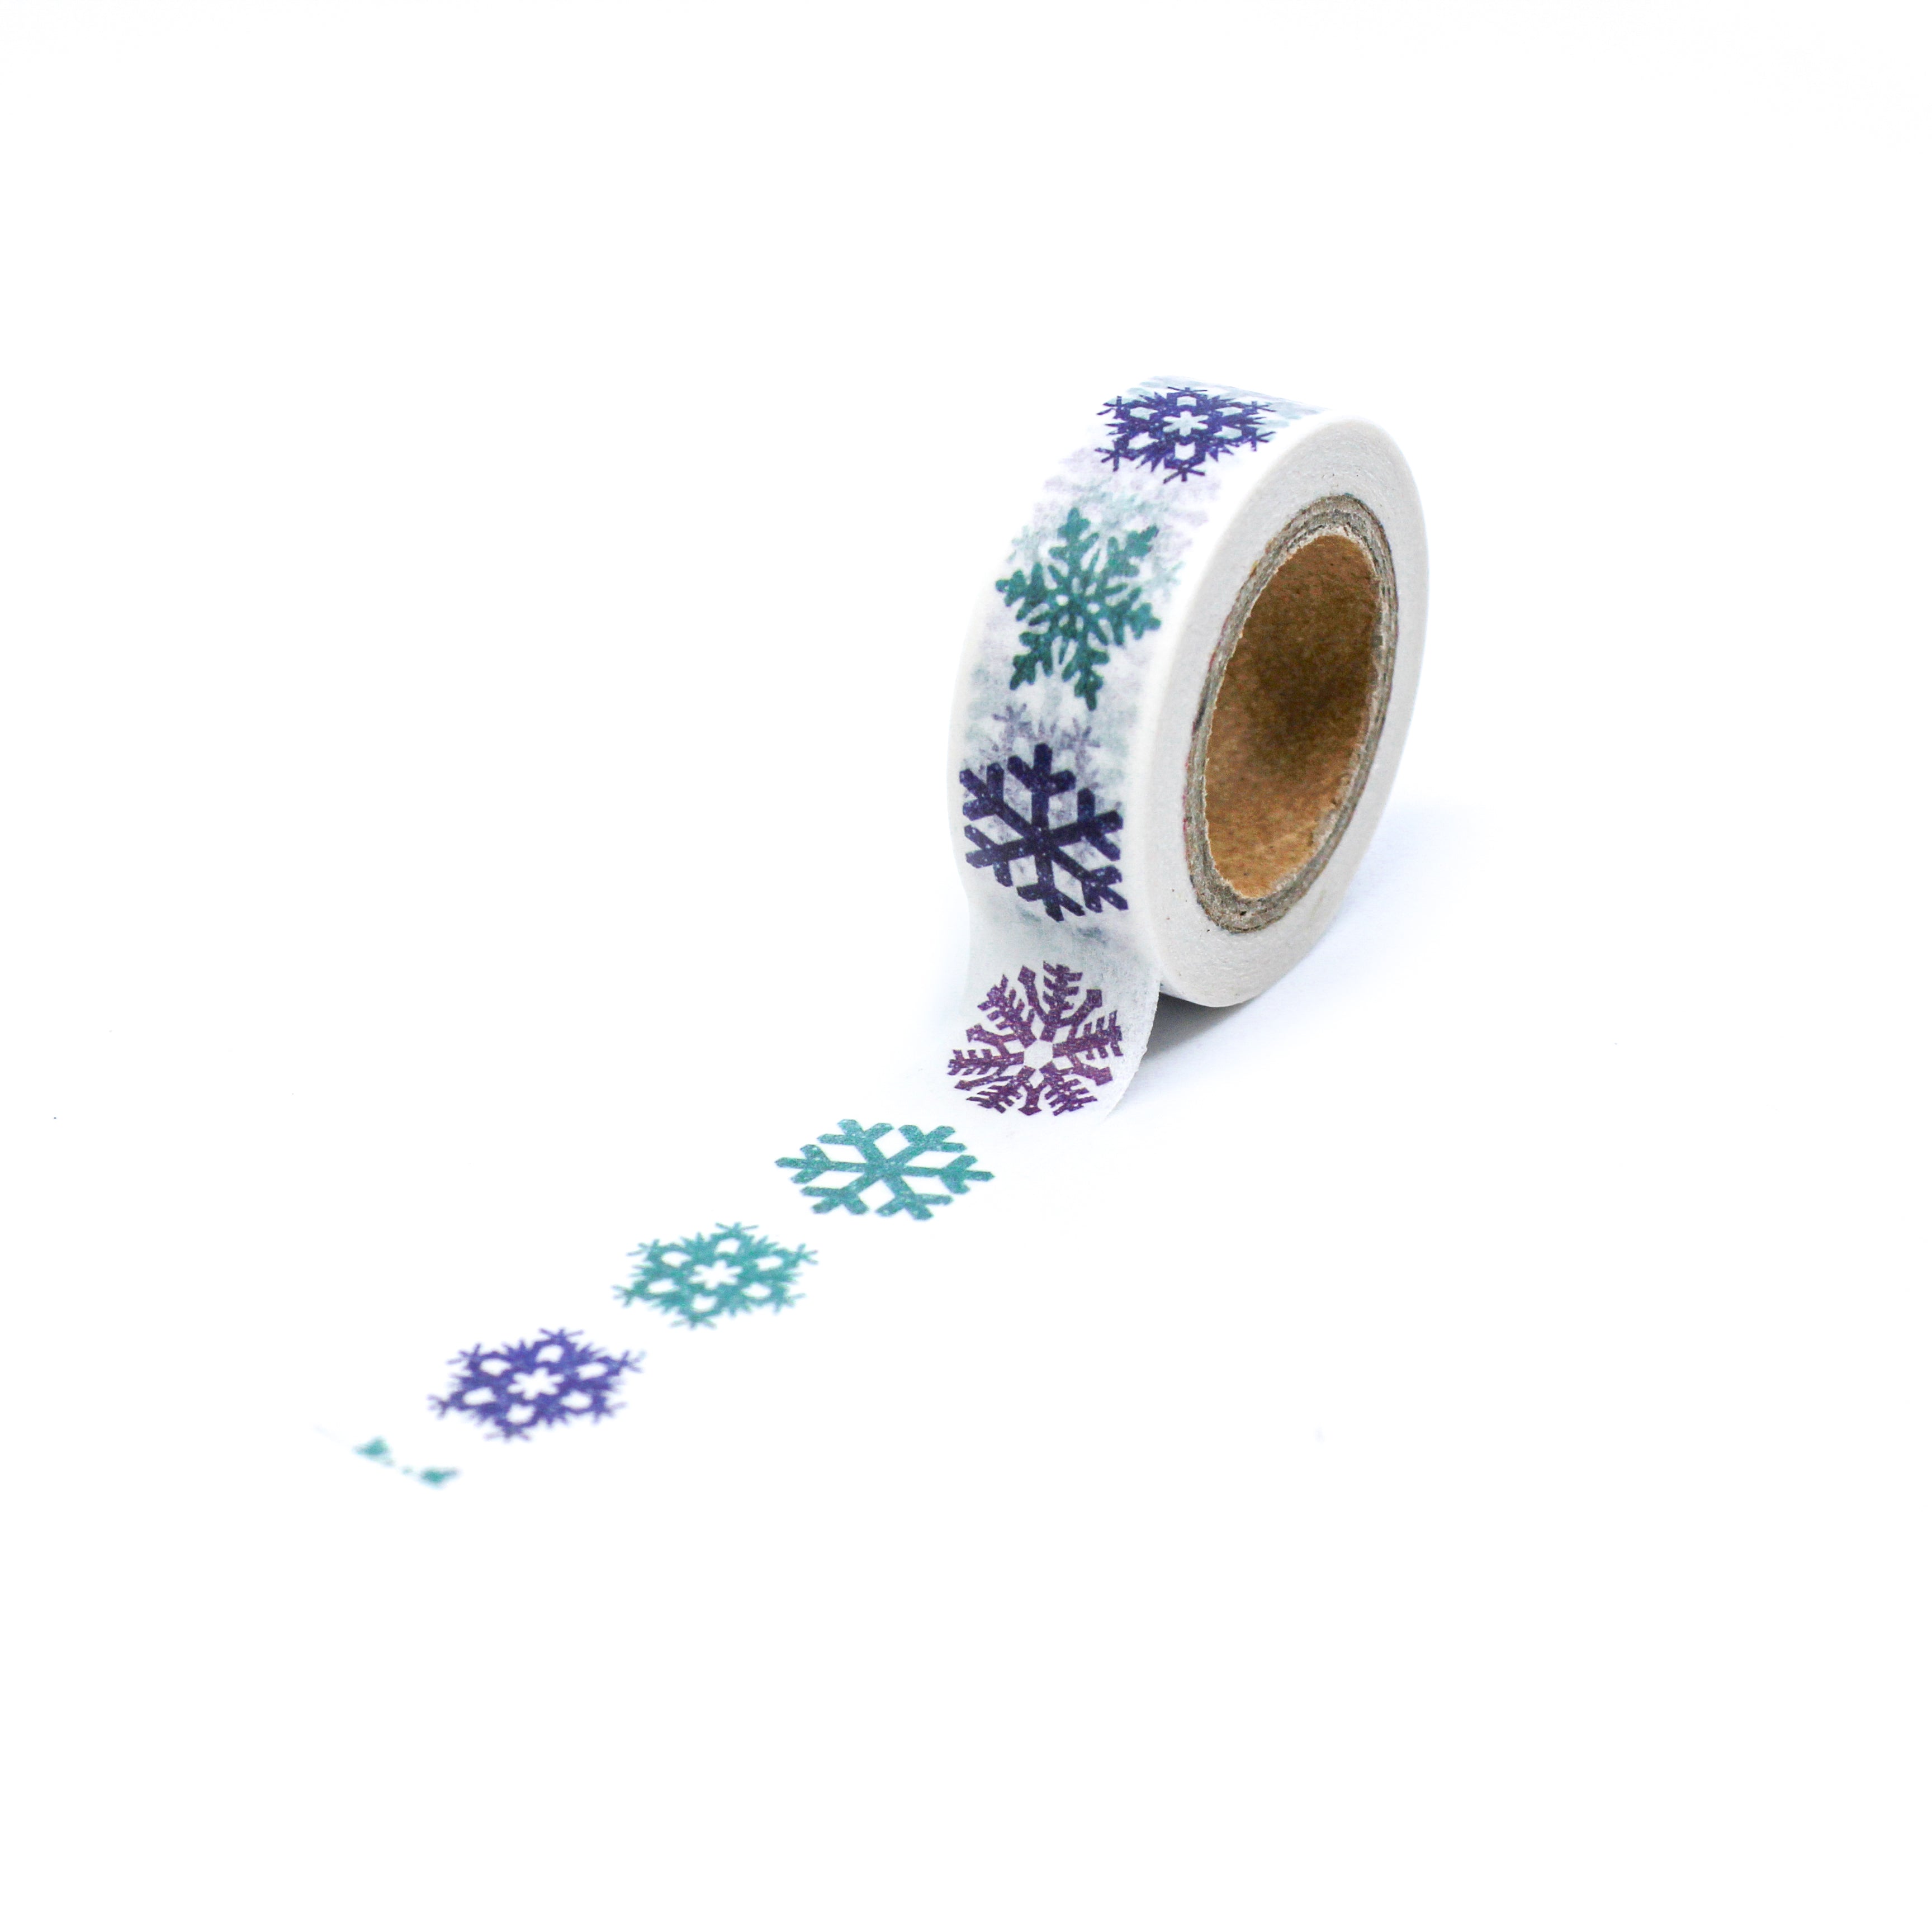 This is a full pattern repeat view of blue, green and purple snow flakes washi tape BBB Supplies Craft Shop